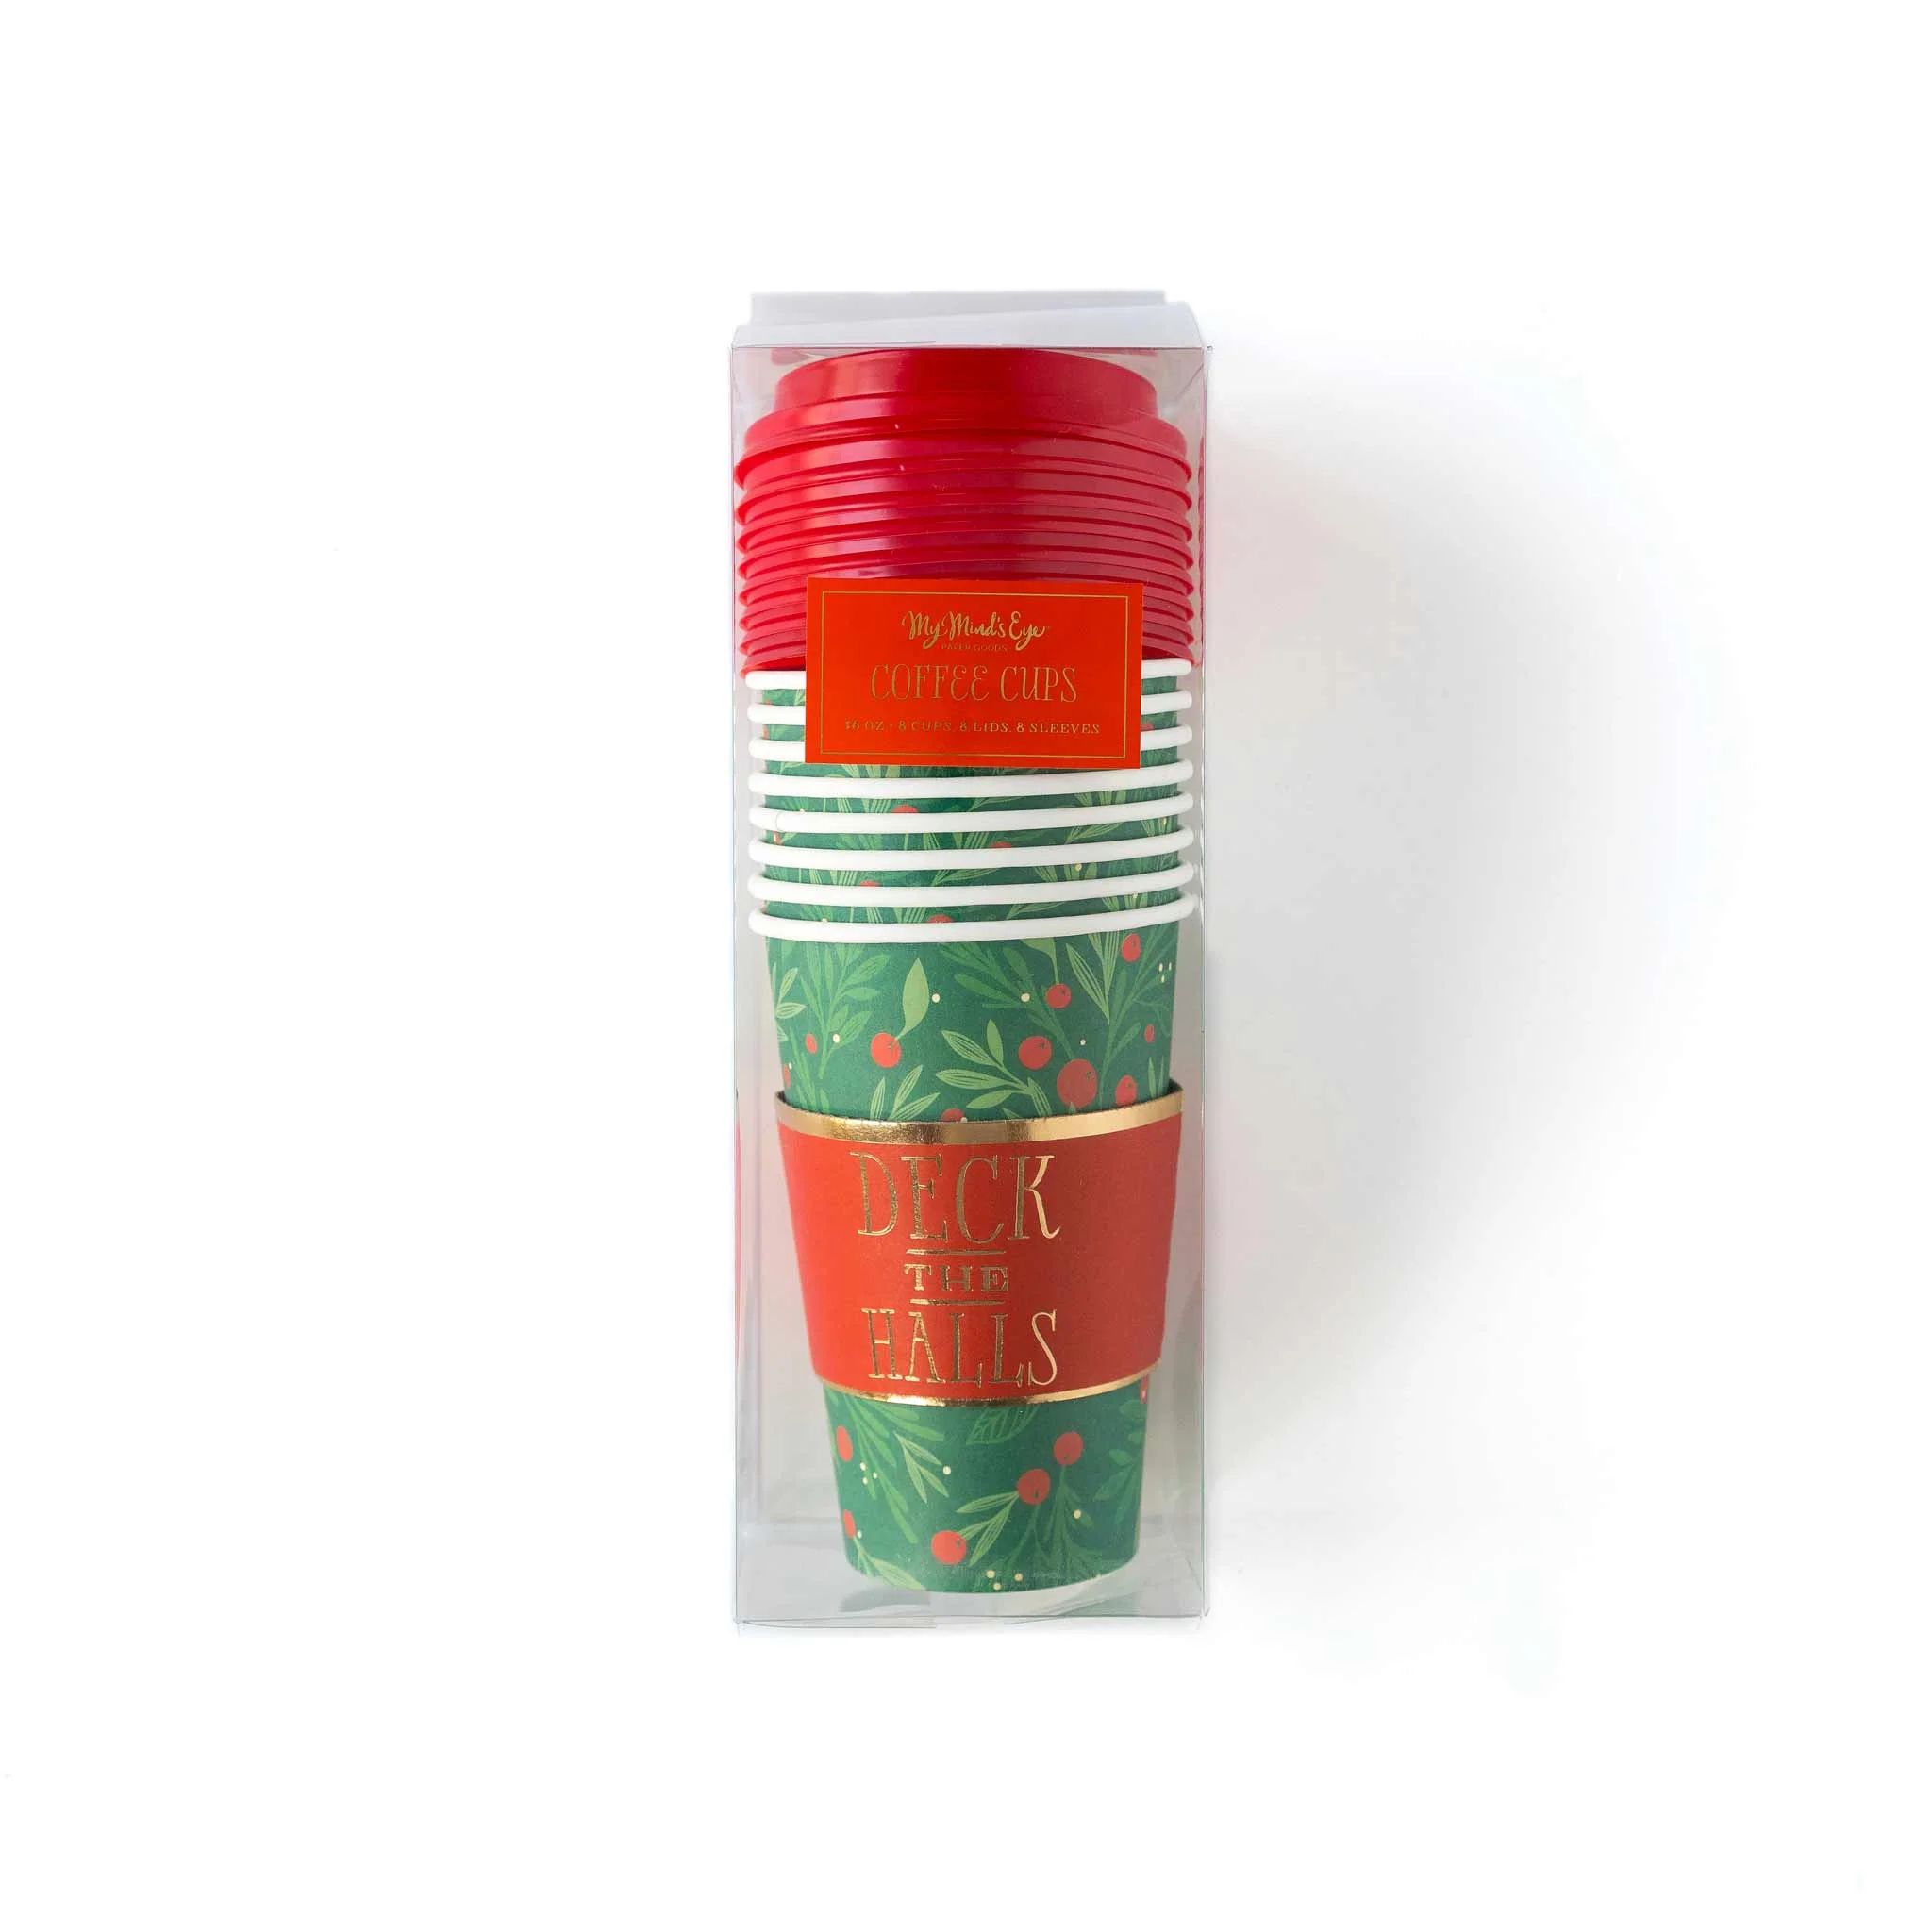 Deck the Halls To Go Cups 8 count | My Mind's Eye